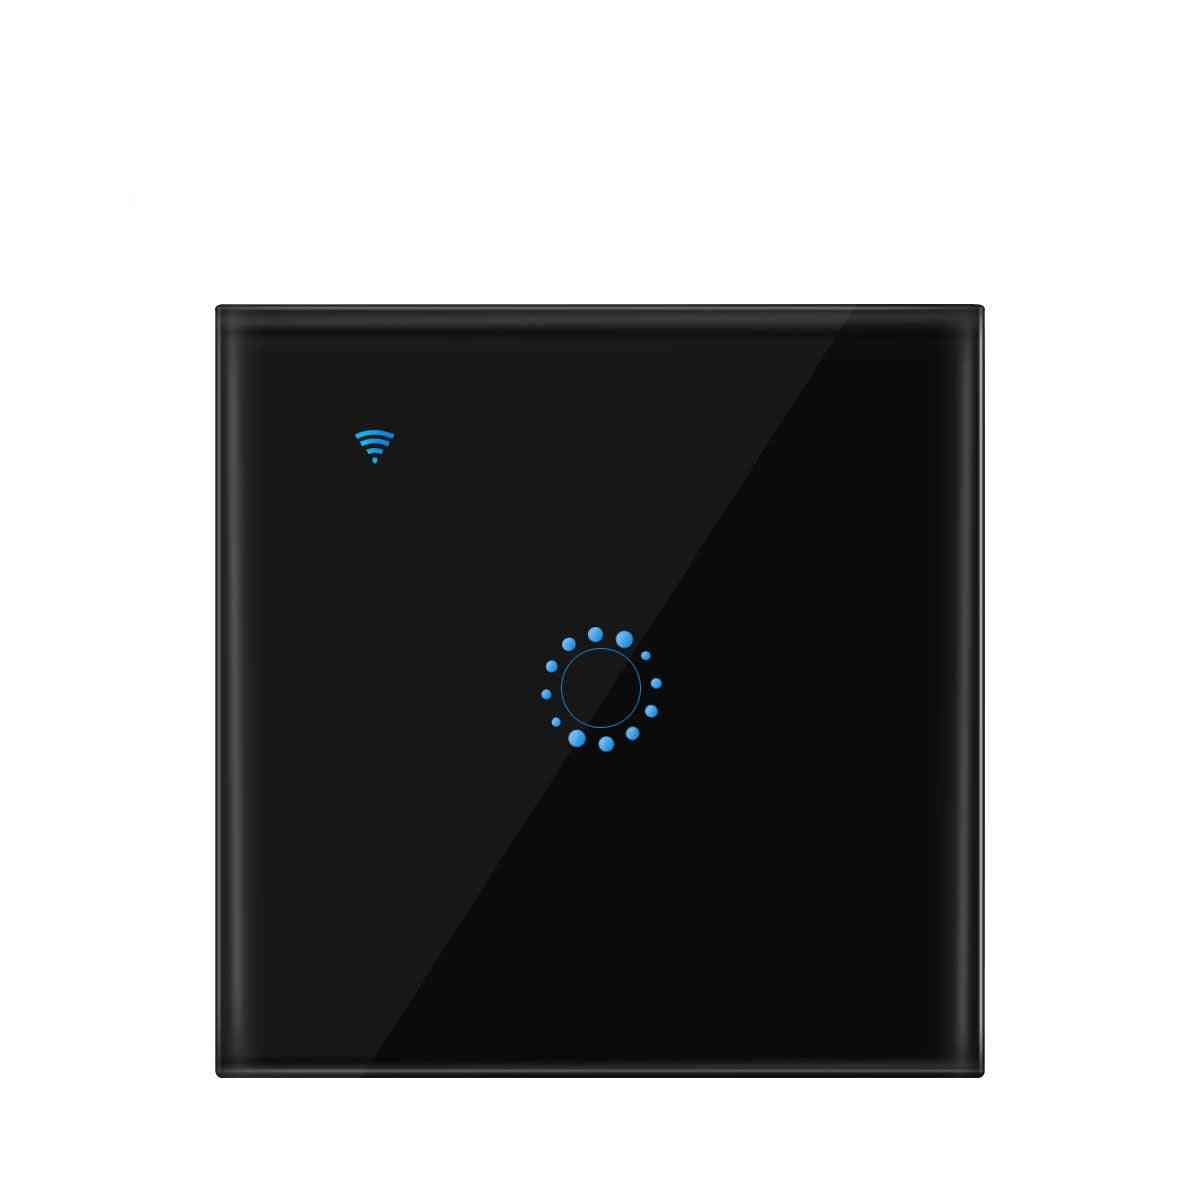 86 Type Smart Home Touch Switch-eu Standard